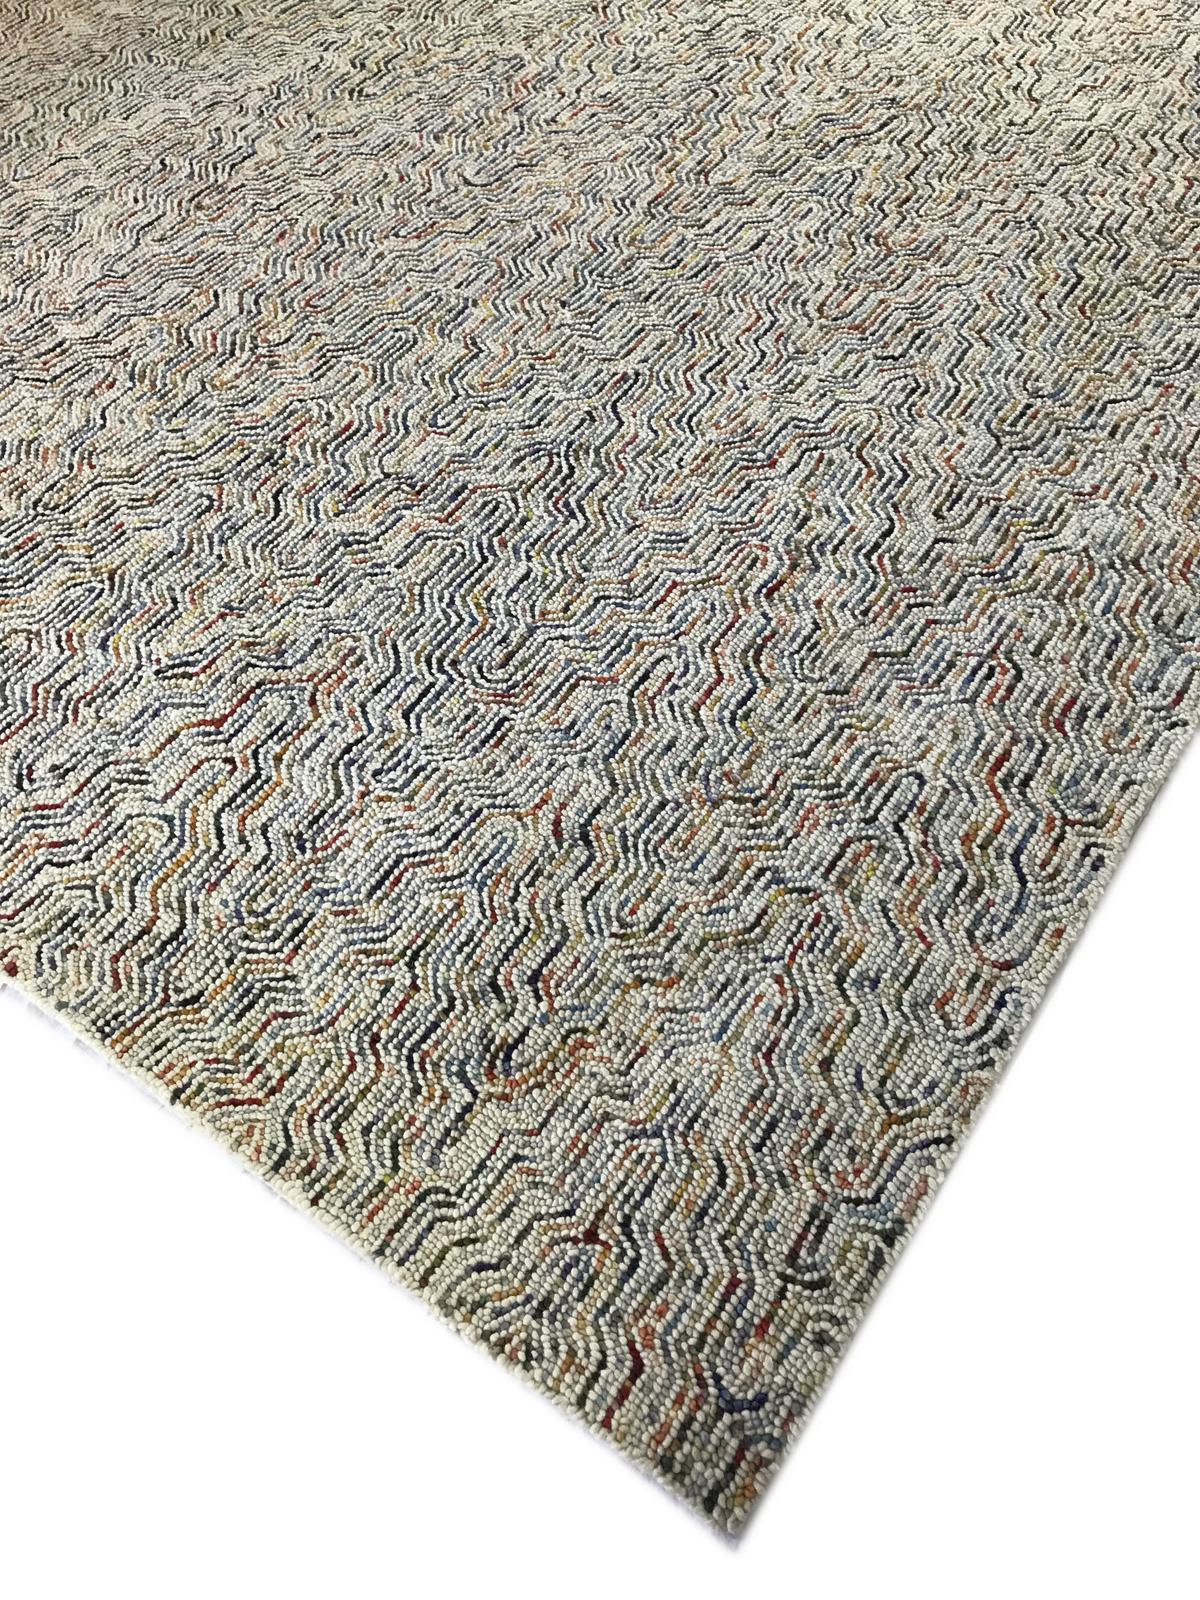 Contemporary Tufted Multi-Color Indian Wool Area Rug For Sale